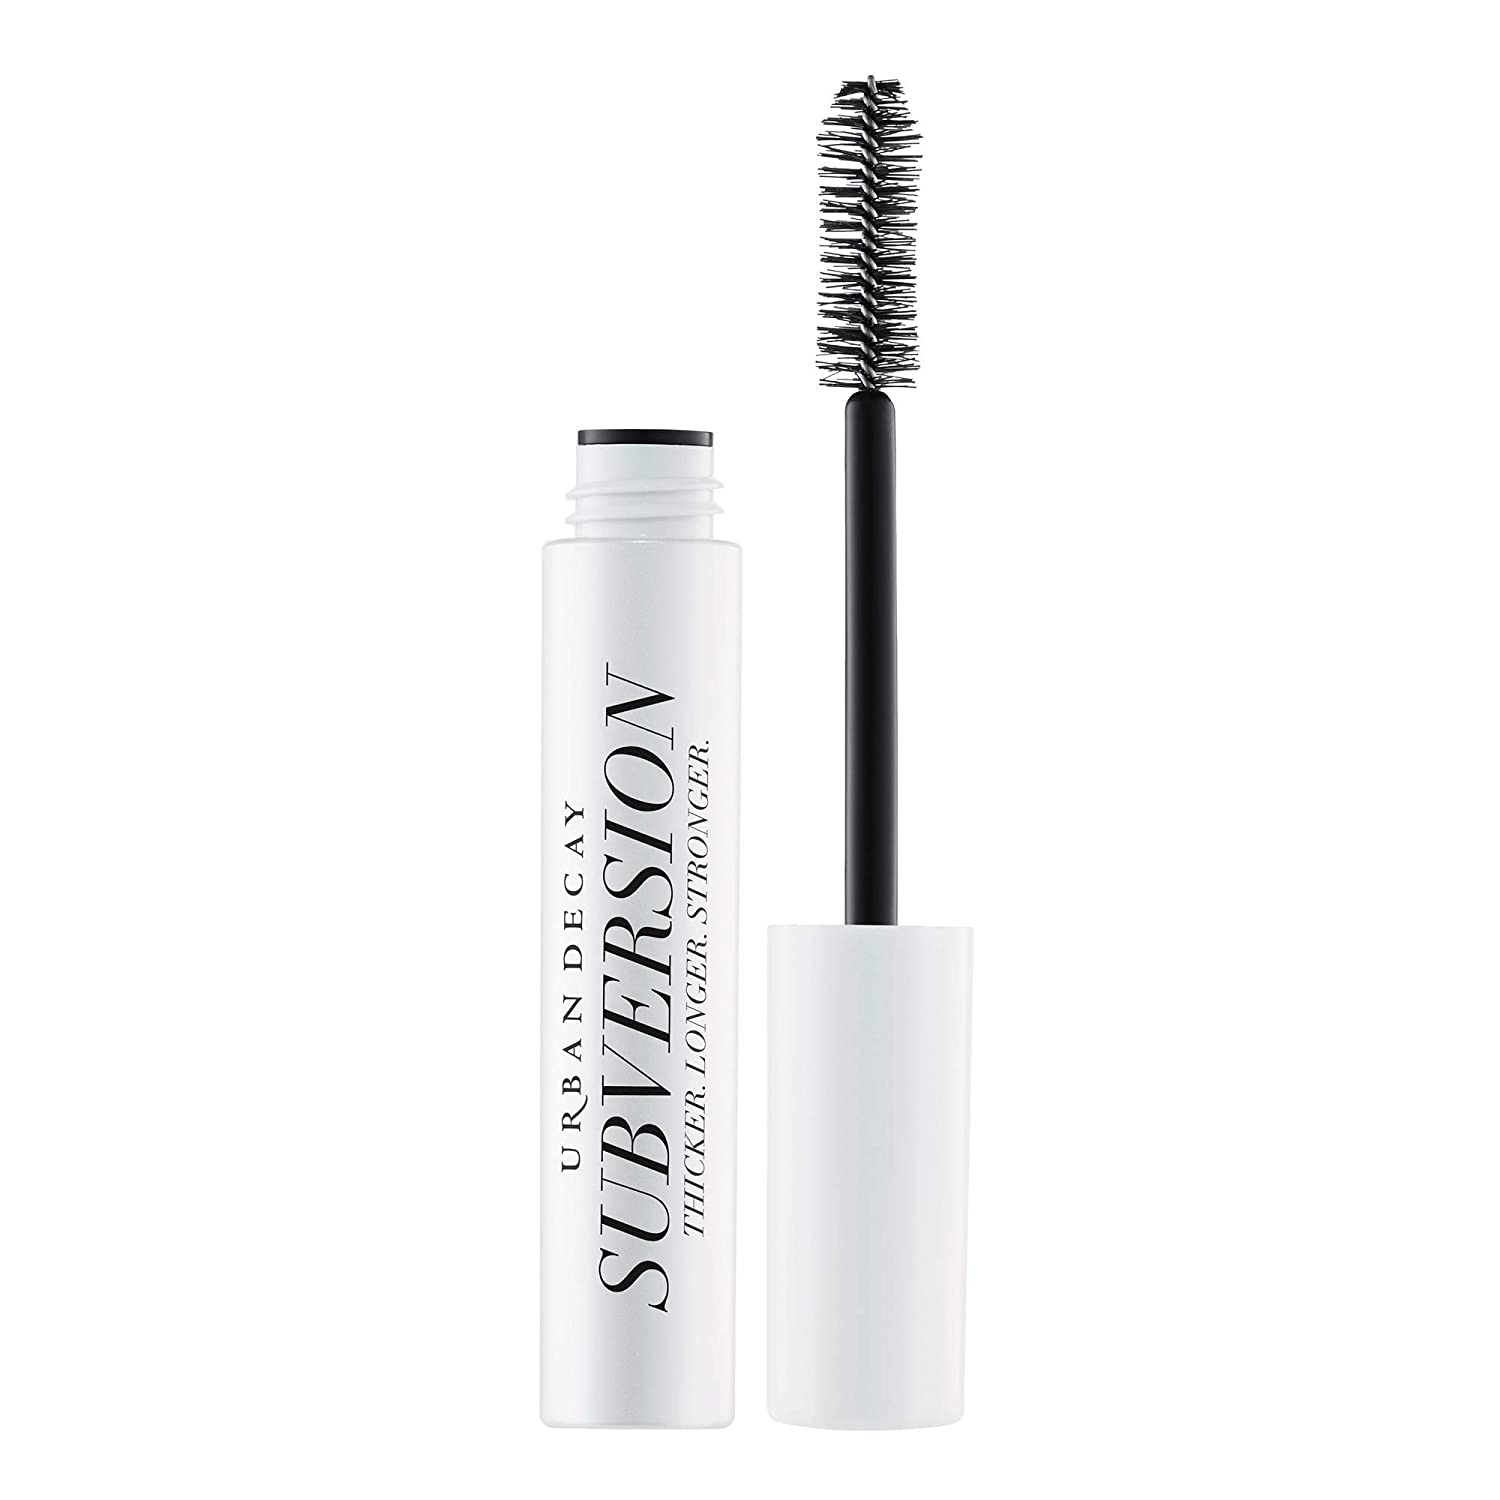 Urban Decay Subversion Eyelash Primers Made with panthenol & Vitamin E, this paraben-free & cruelty-free mascara primer strengthens natural lashes for the perfect wide-eyed mascara look. A conditioning and protective mascara primer that preps lashes for the ultimate volume & length, creating visibly longer, volumized lashes.